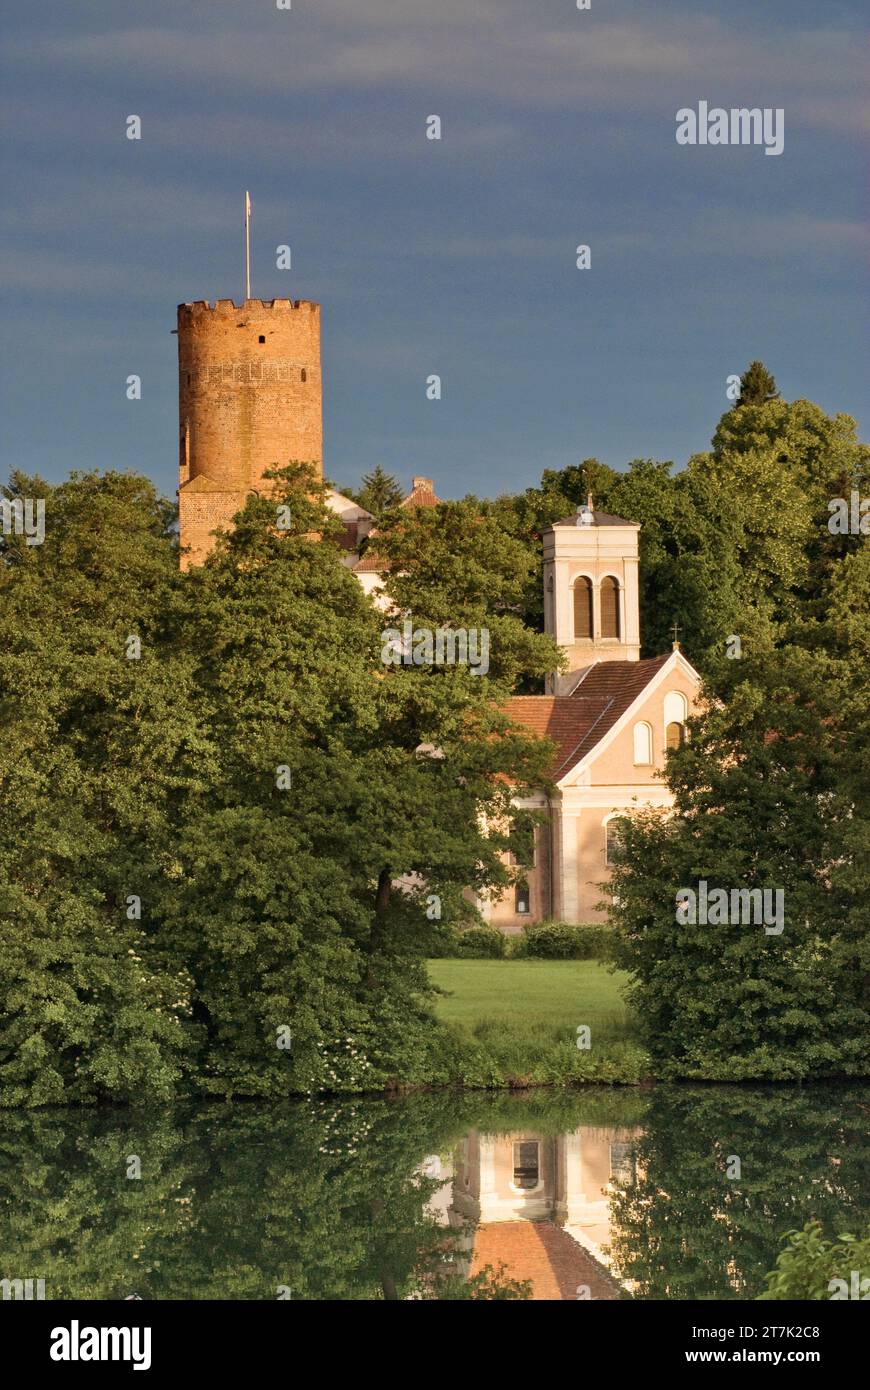 Tower at Castle of Knights of St John of Jerusalem and church over Ciecz Lake in Łagów, Lubuskie Voivodeship,  Poland Stock Photo